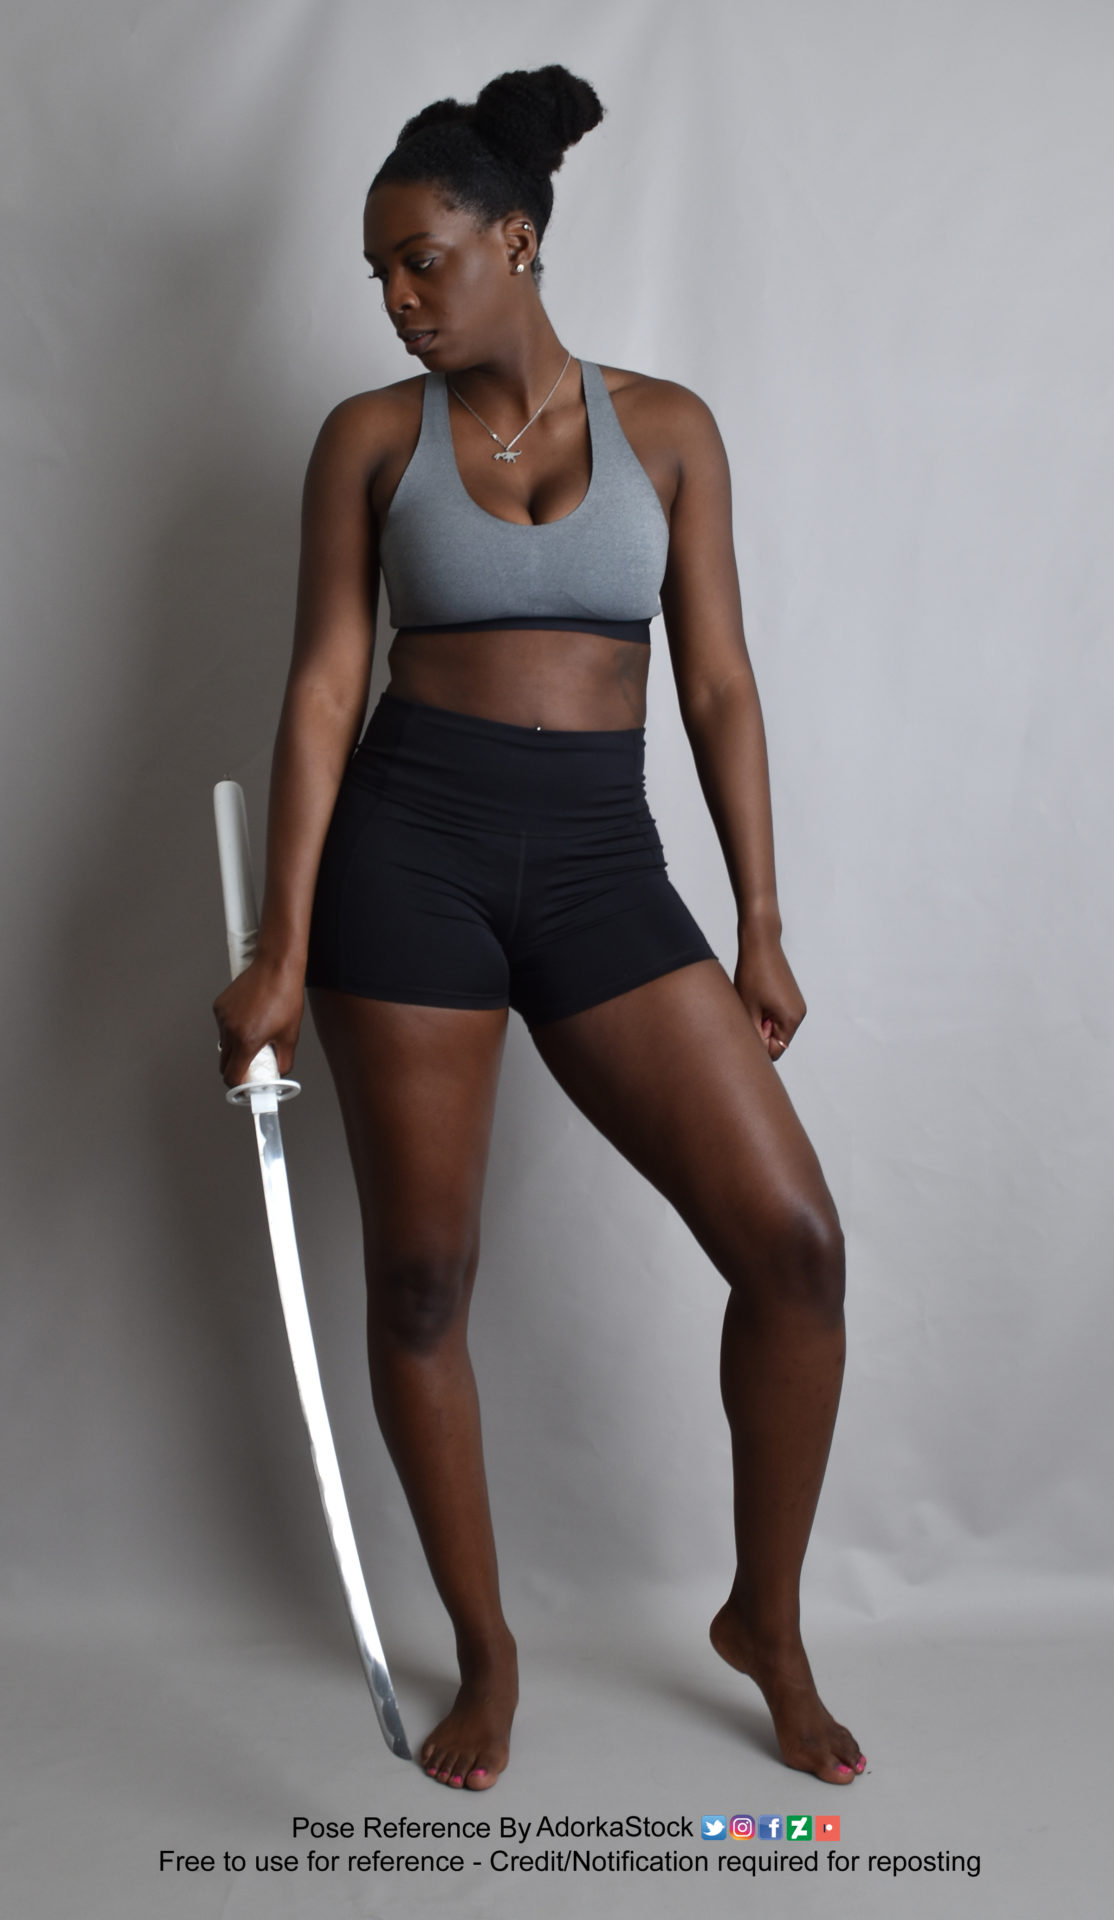 Thin, Black, female model standing with weight shifted to one foot, holding a katana in her right hand, looking down and off to the right.